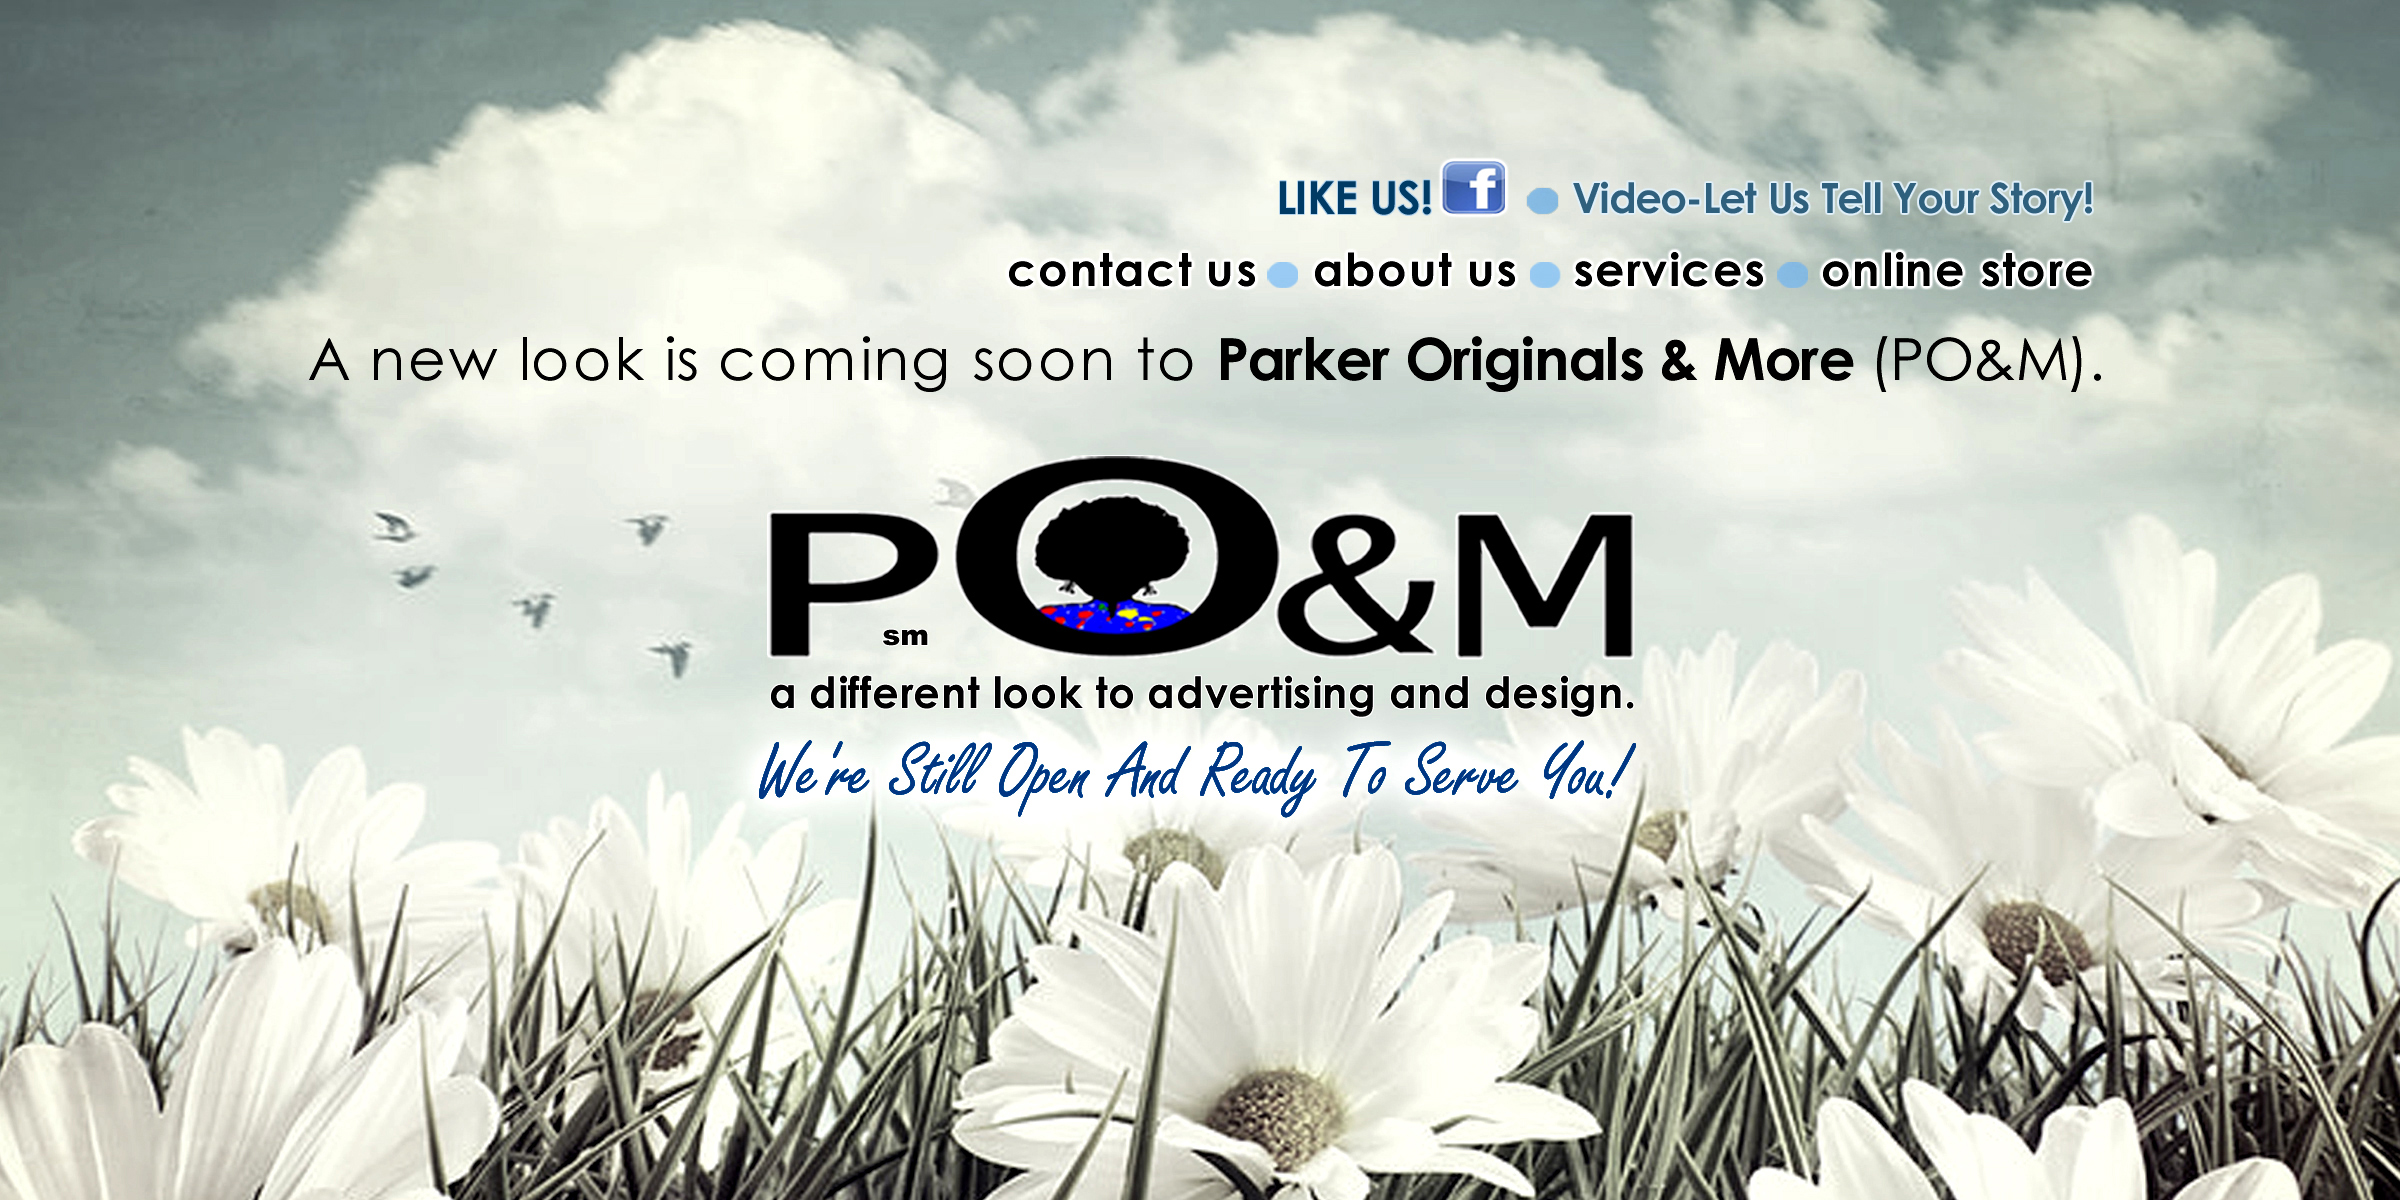 In the world of advertising and marketing there are always deadlines to meet.  Everyday you are searching for new ideas that keep your organization three steps ahead of the competition.  At Parker Originals & More (PO&M), we understand these opportunities and pride ourselves on being your total solution source...from media placement to graphic design.  We are based in Dallas Texas and believe successfulbranding happens when the message is based on truth ...not Hype.  When you develop your campaign with a long-term vision, knowing each action will build customer loyalty and trust that results in sales.   Yes, in Dallas Texas innovative and effective marketing can be affordable.  Parker Originals & More (PO&M) strives everyday to be one of the advertising agencies that makes this statement true. We take care of our clients...providing service first...during and after the project is completed.